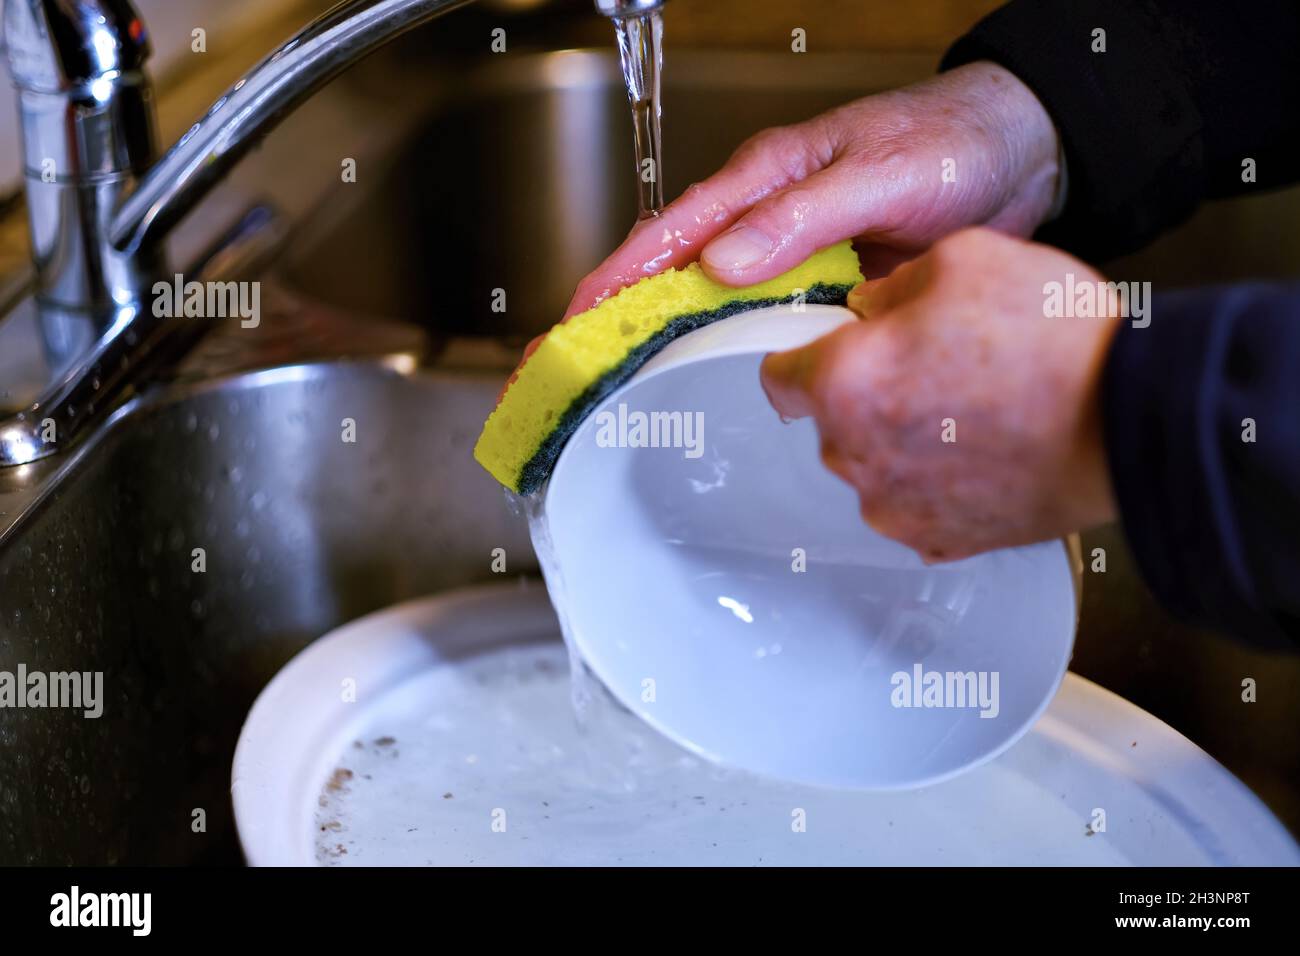 Senior man hands wash plate dishes in kitchen sink under running water at home. Authentic senior lifestyle after retirement and household work. Stock Photo